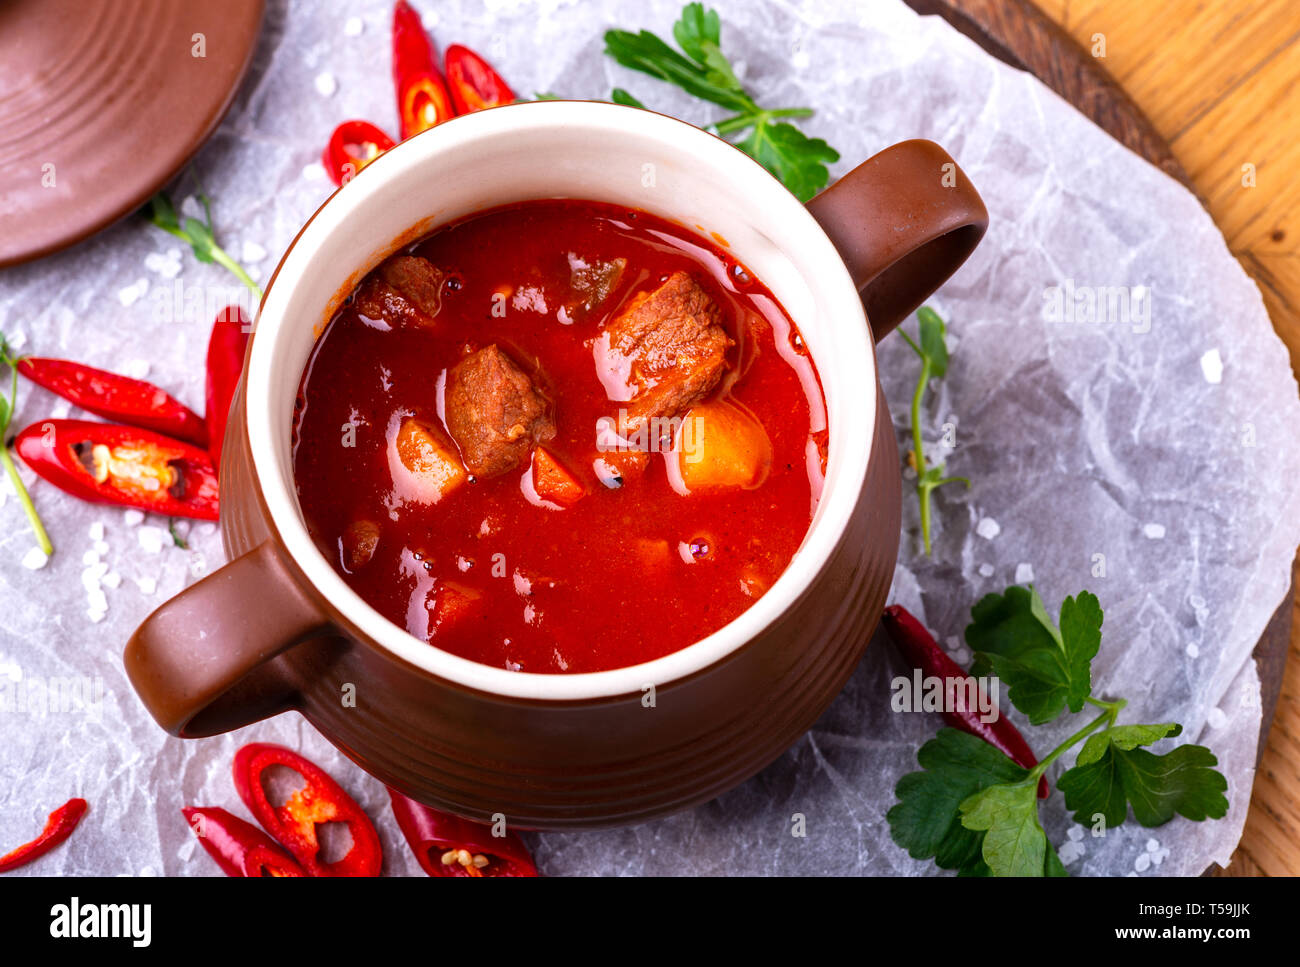 Tasty Hungarian Hot Goulash Soup Bograch or Gulas Lamb Meat Stew on Wooden Surface at Restaurant. Traditional Food. Stock Photo